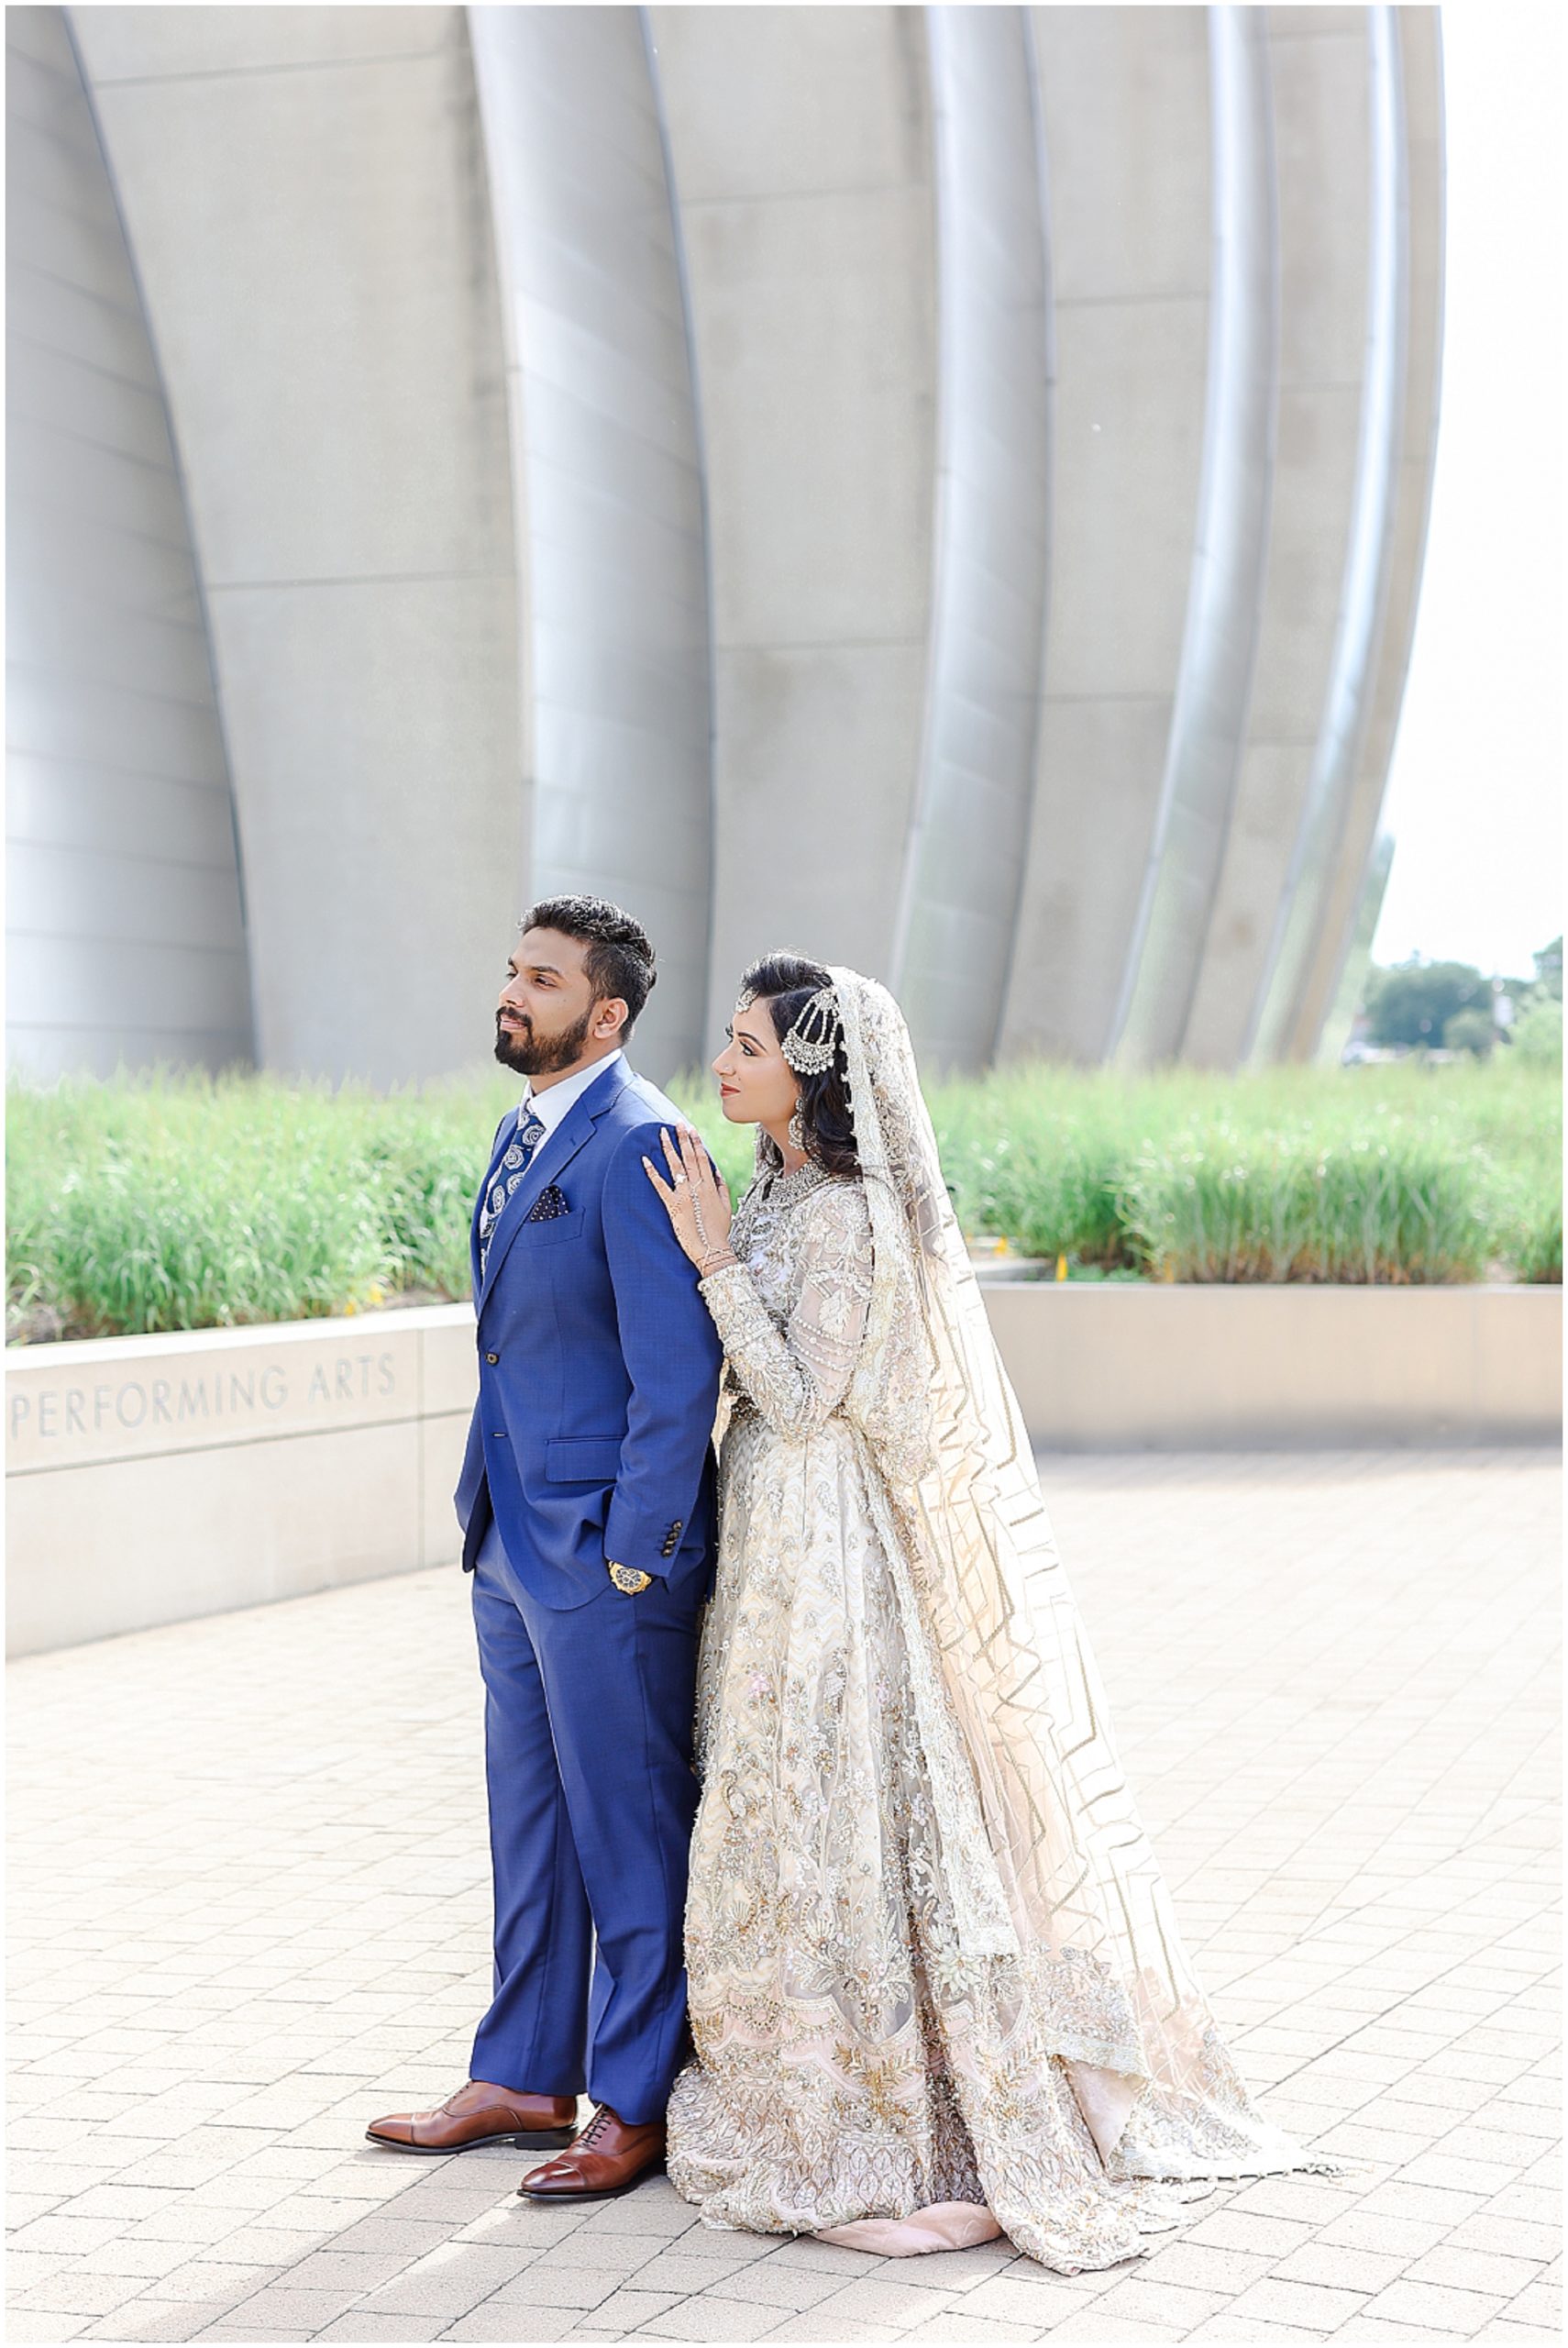 beautiful portrait ideas - wedding photo poses for pakistani and indian weddings and muslim bride - best photographer in st.louis stl and kansas city